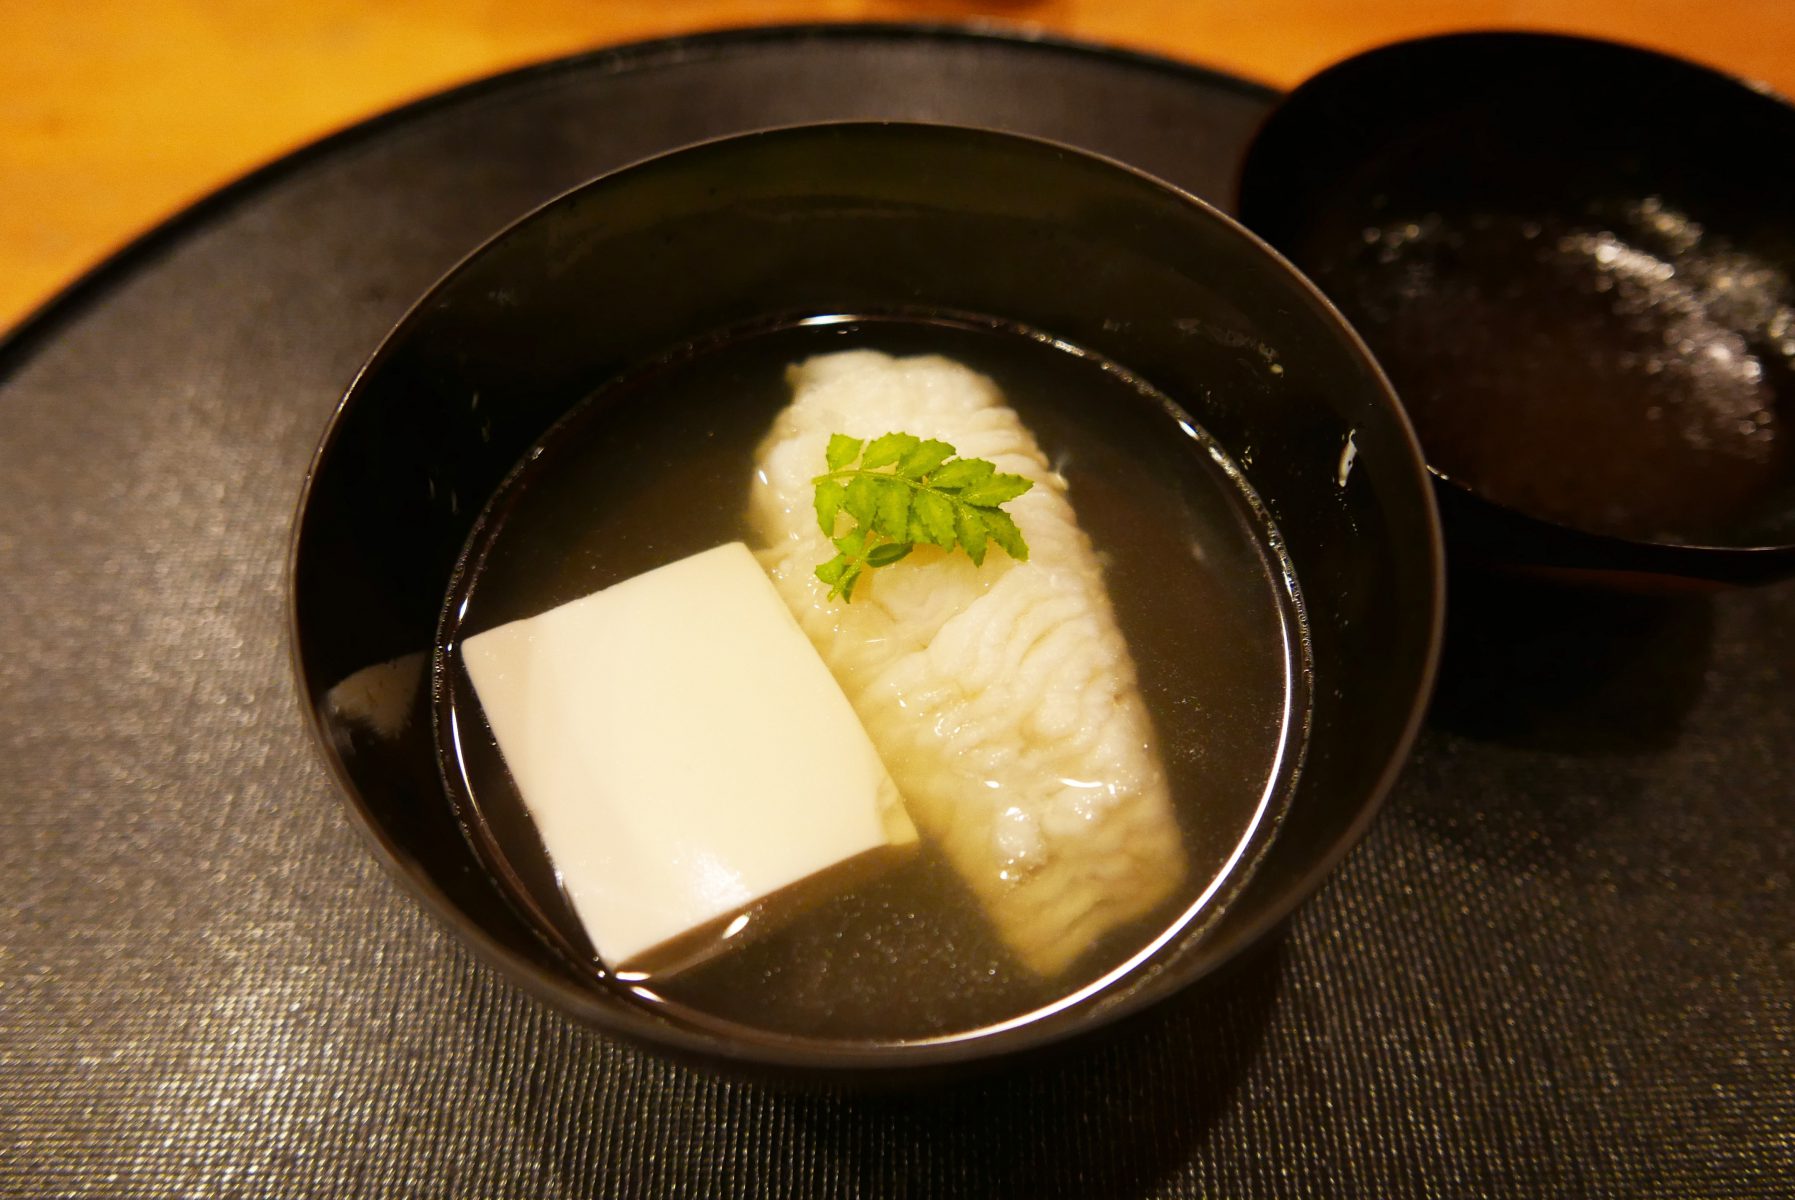 Greenling fish with tofu